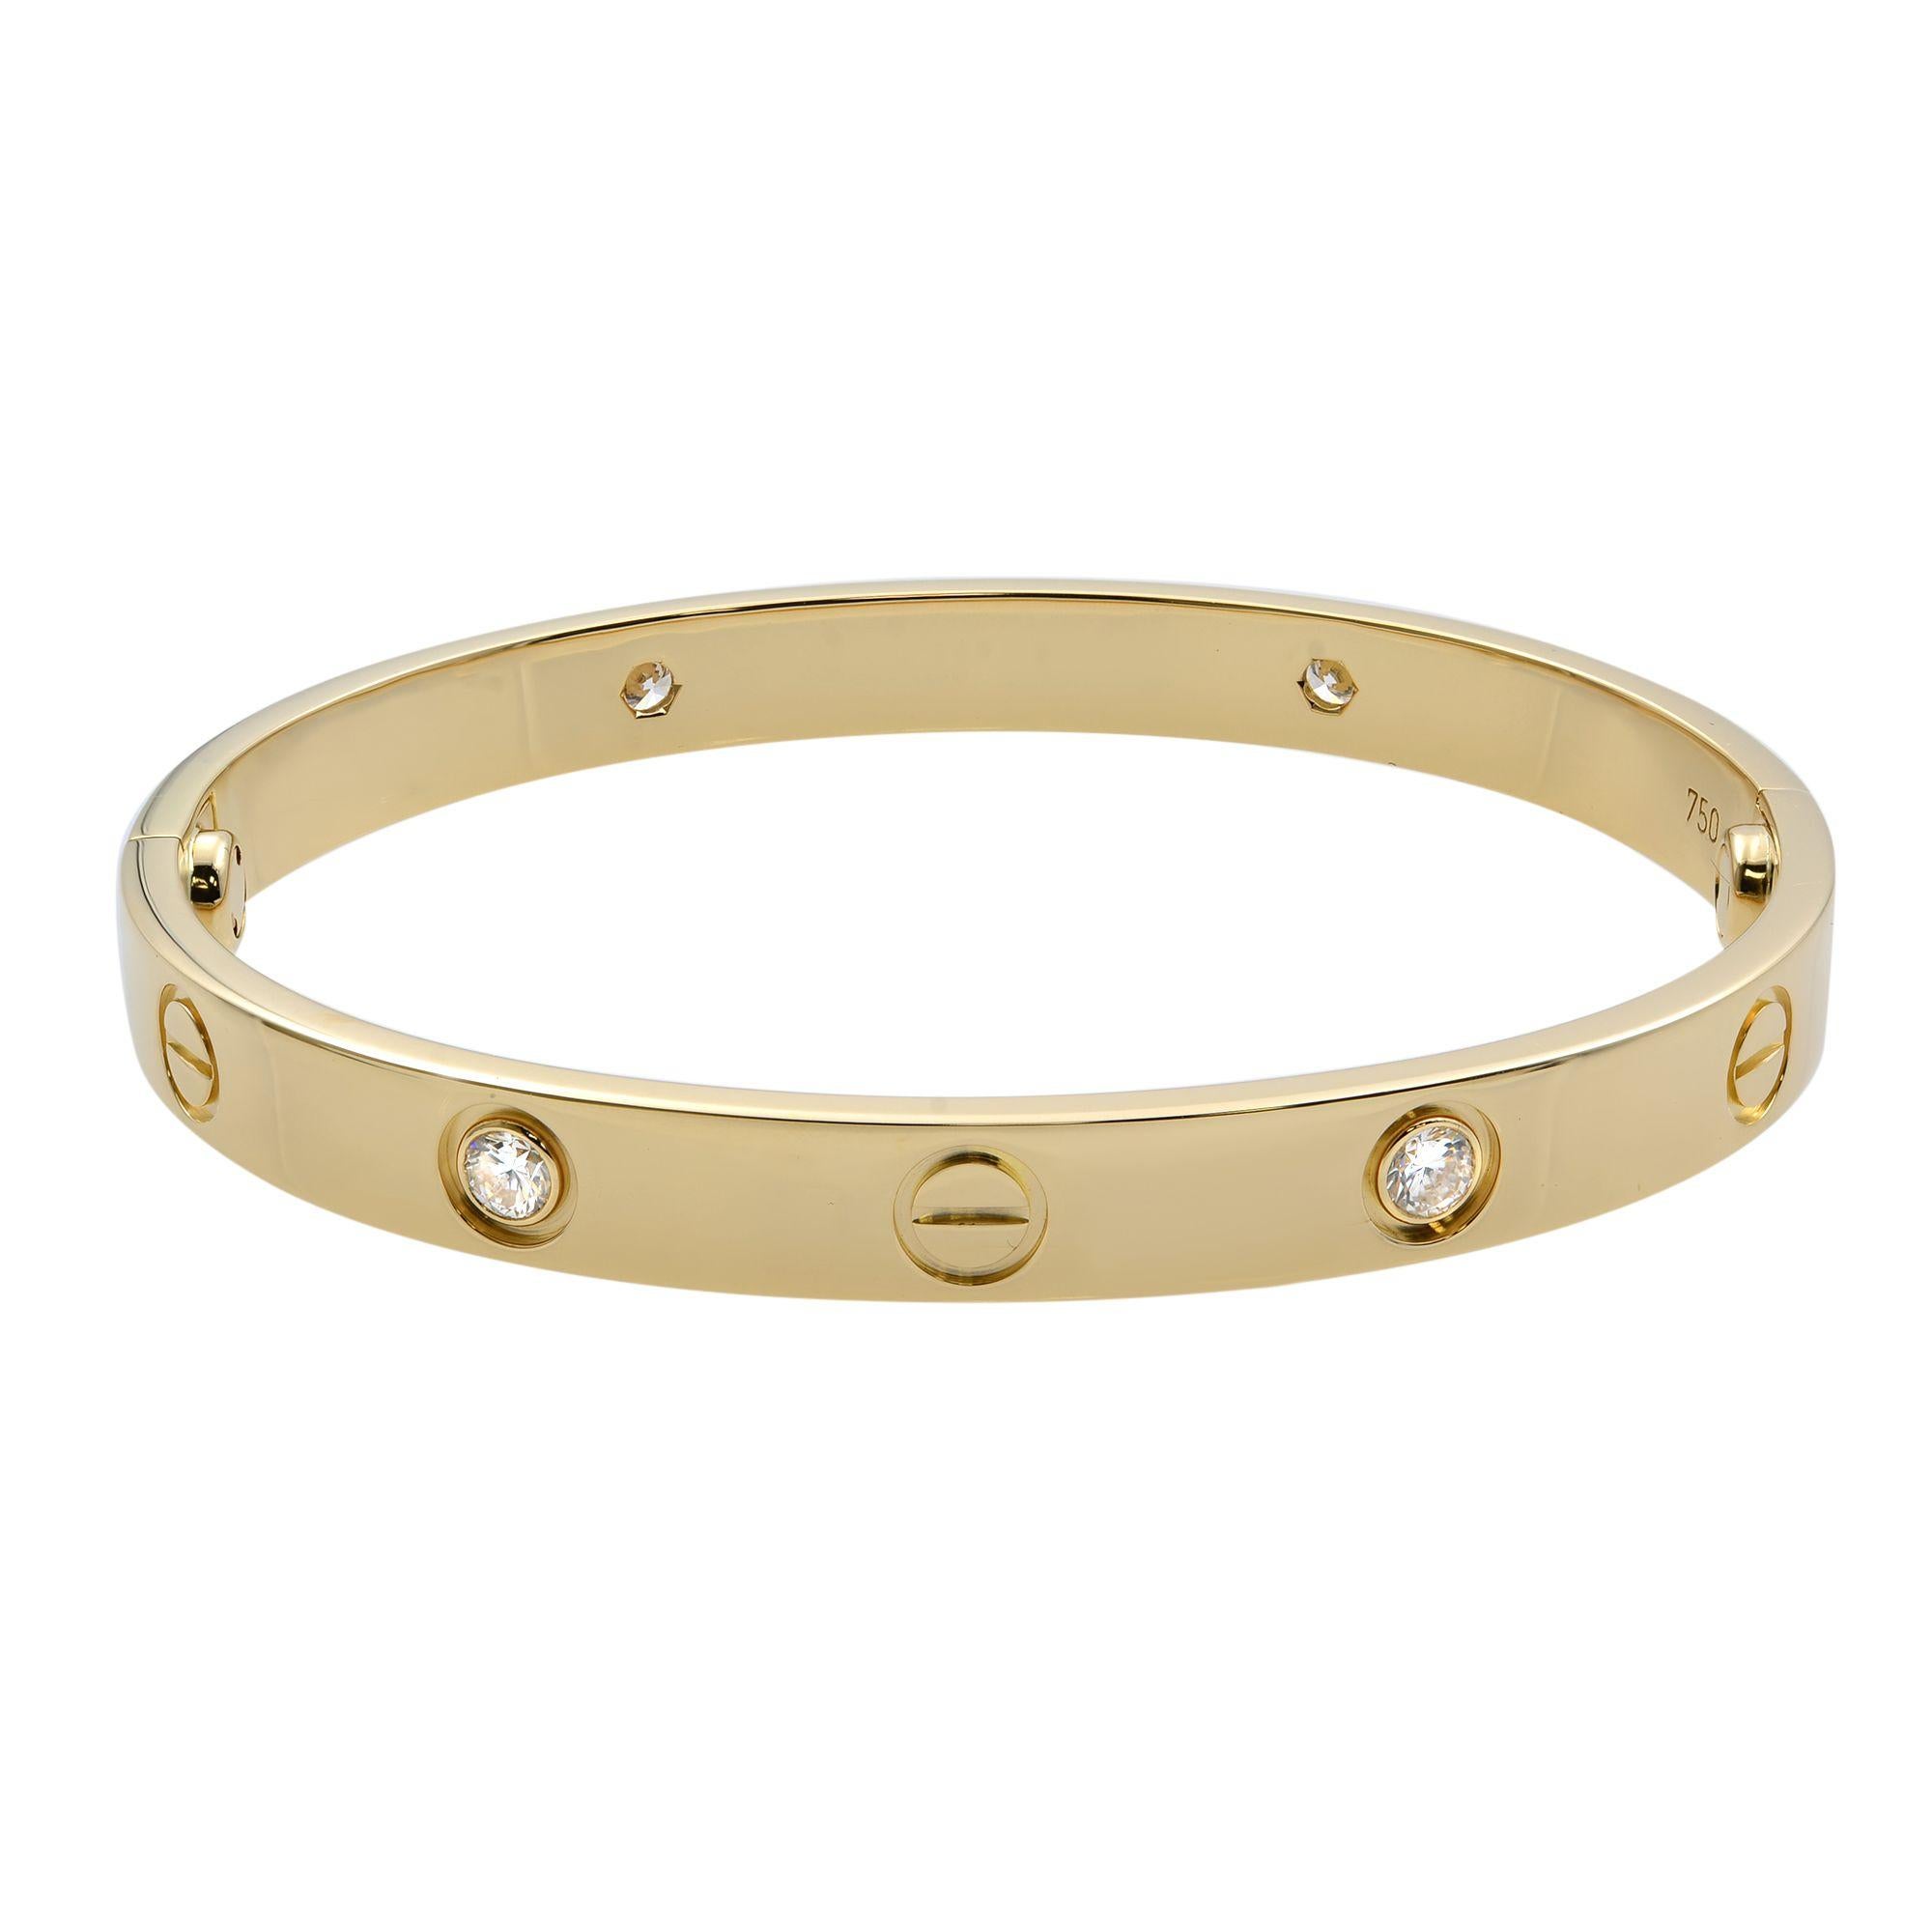 Cartier Love bracelet, 18K yellow gold, set with 4 brilliant-cut diamonds totaling 0.42 carats. New Style. Width: 6.1mm. Size 16. Great pre-owned condition. Sold with box and a screwdriver. No papers. 

